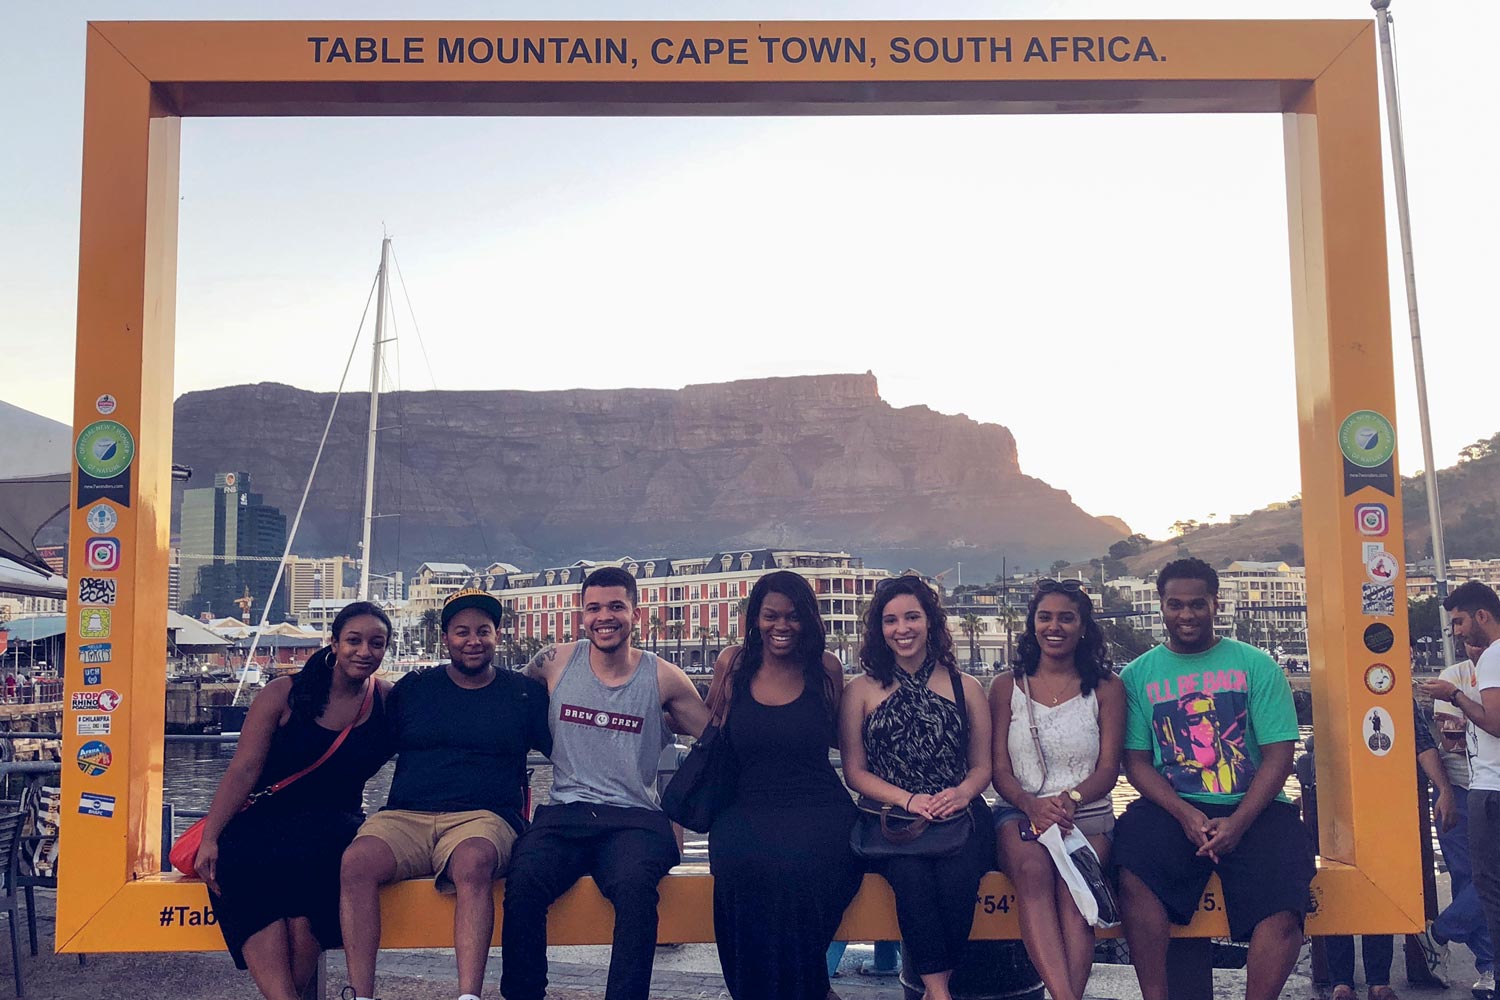 From left, Jianne McDonald, Jah Akande, Elijah McDonnaugh, Kelsey Watkins, Rebecca Robinson, Marwa Abdelaziz and Steven Morris in Cape Town, South Africa pose for a photo